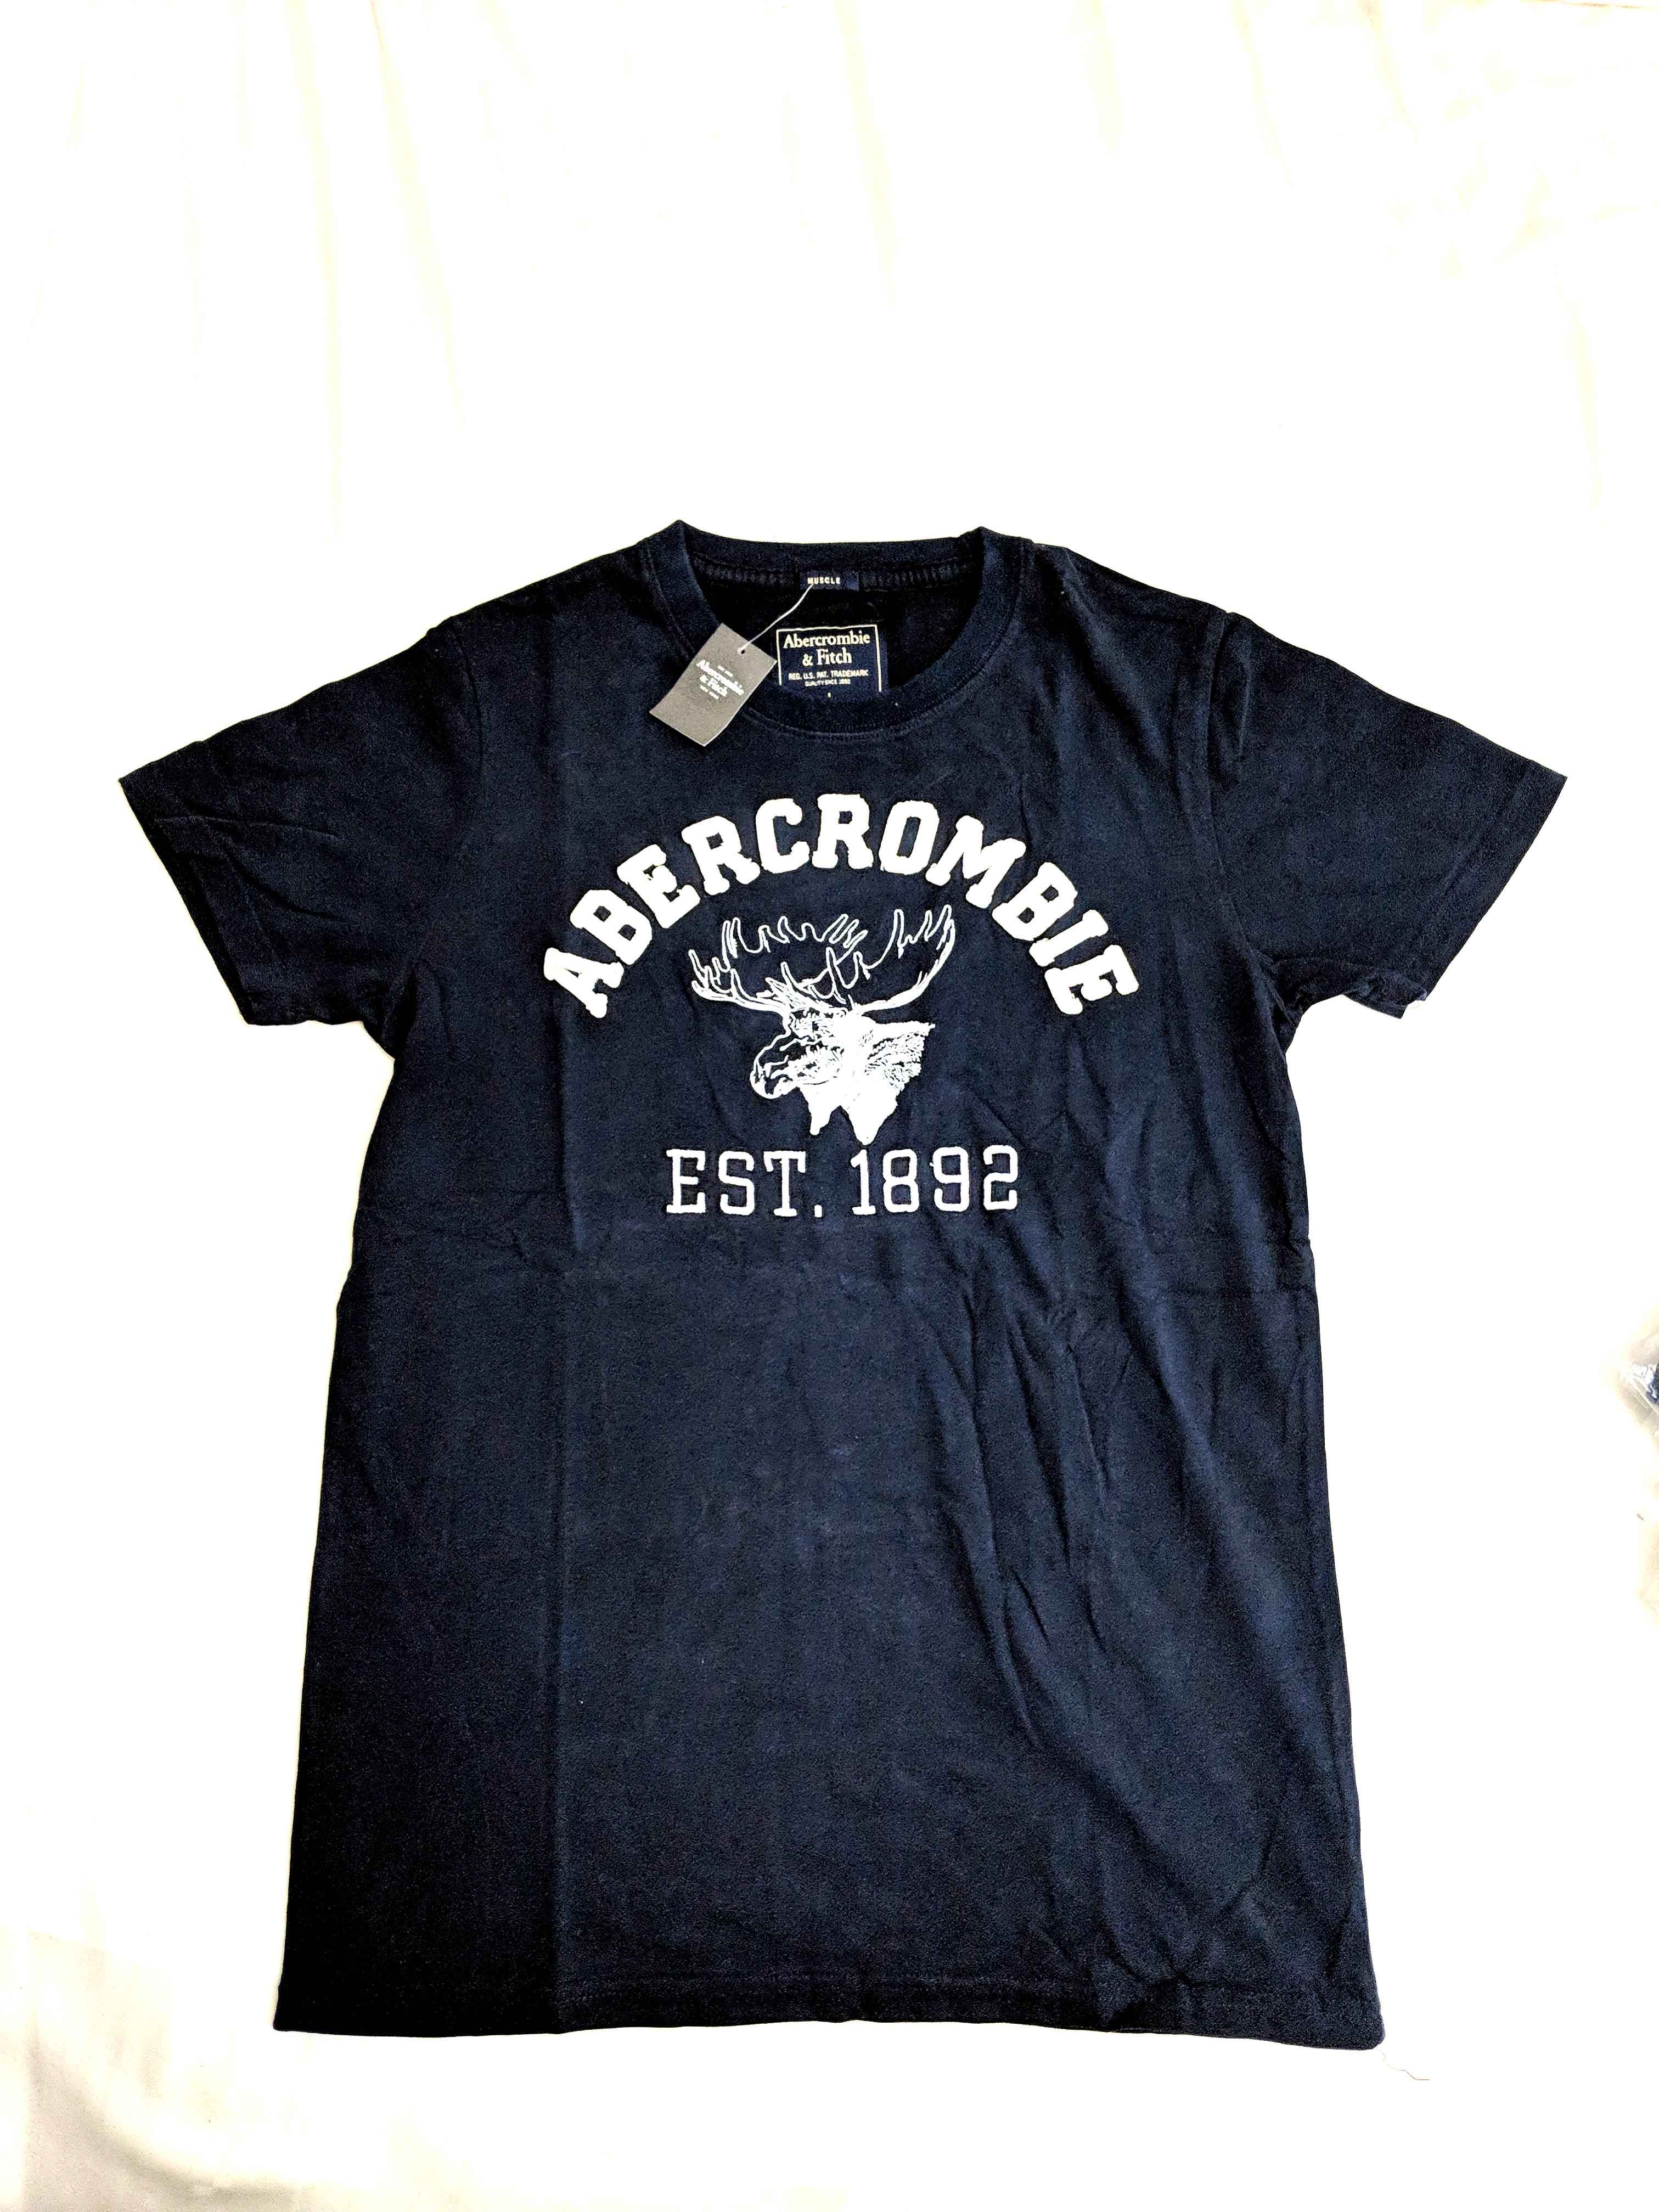 abercrombie & fitch t-shirt sale